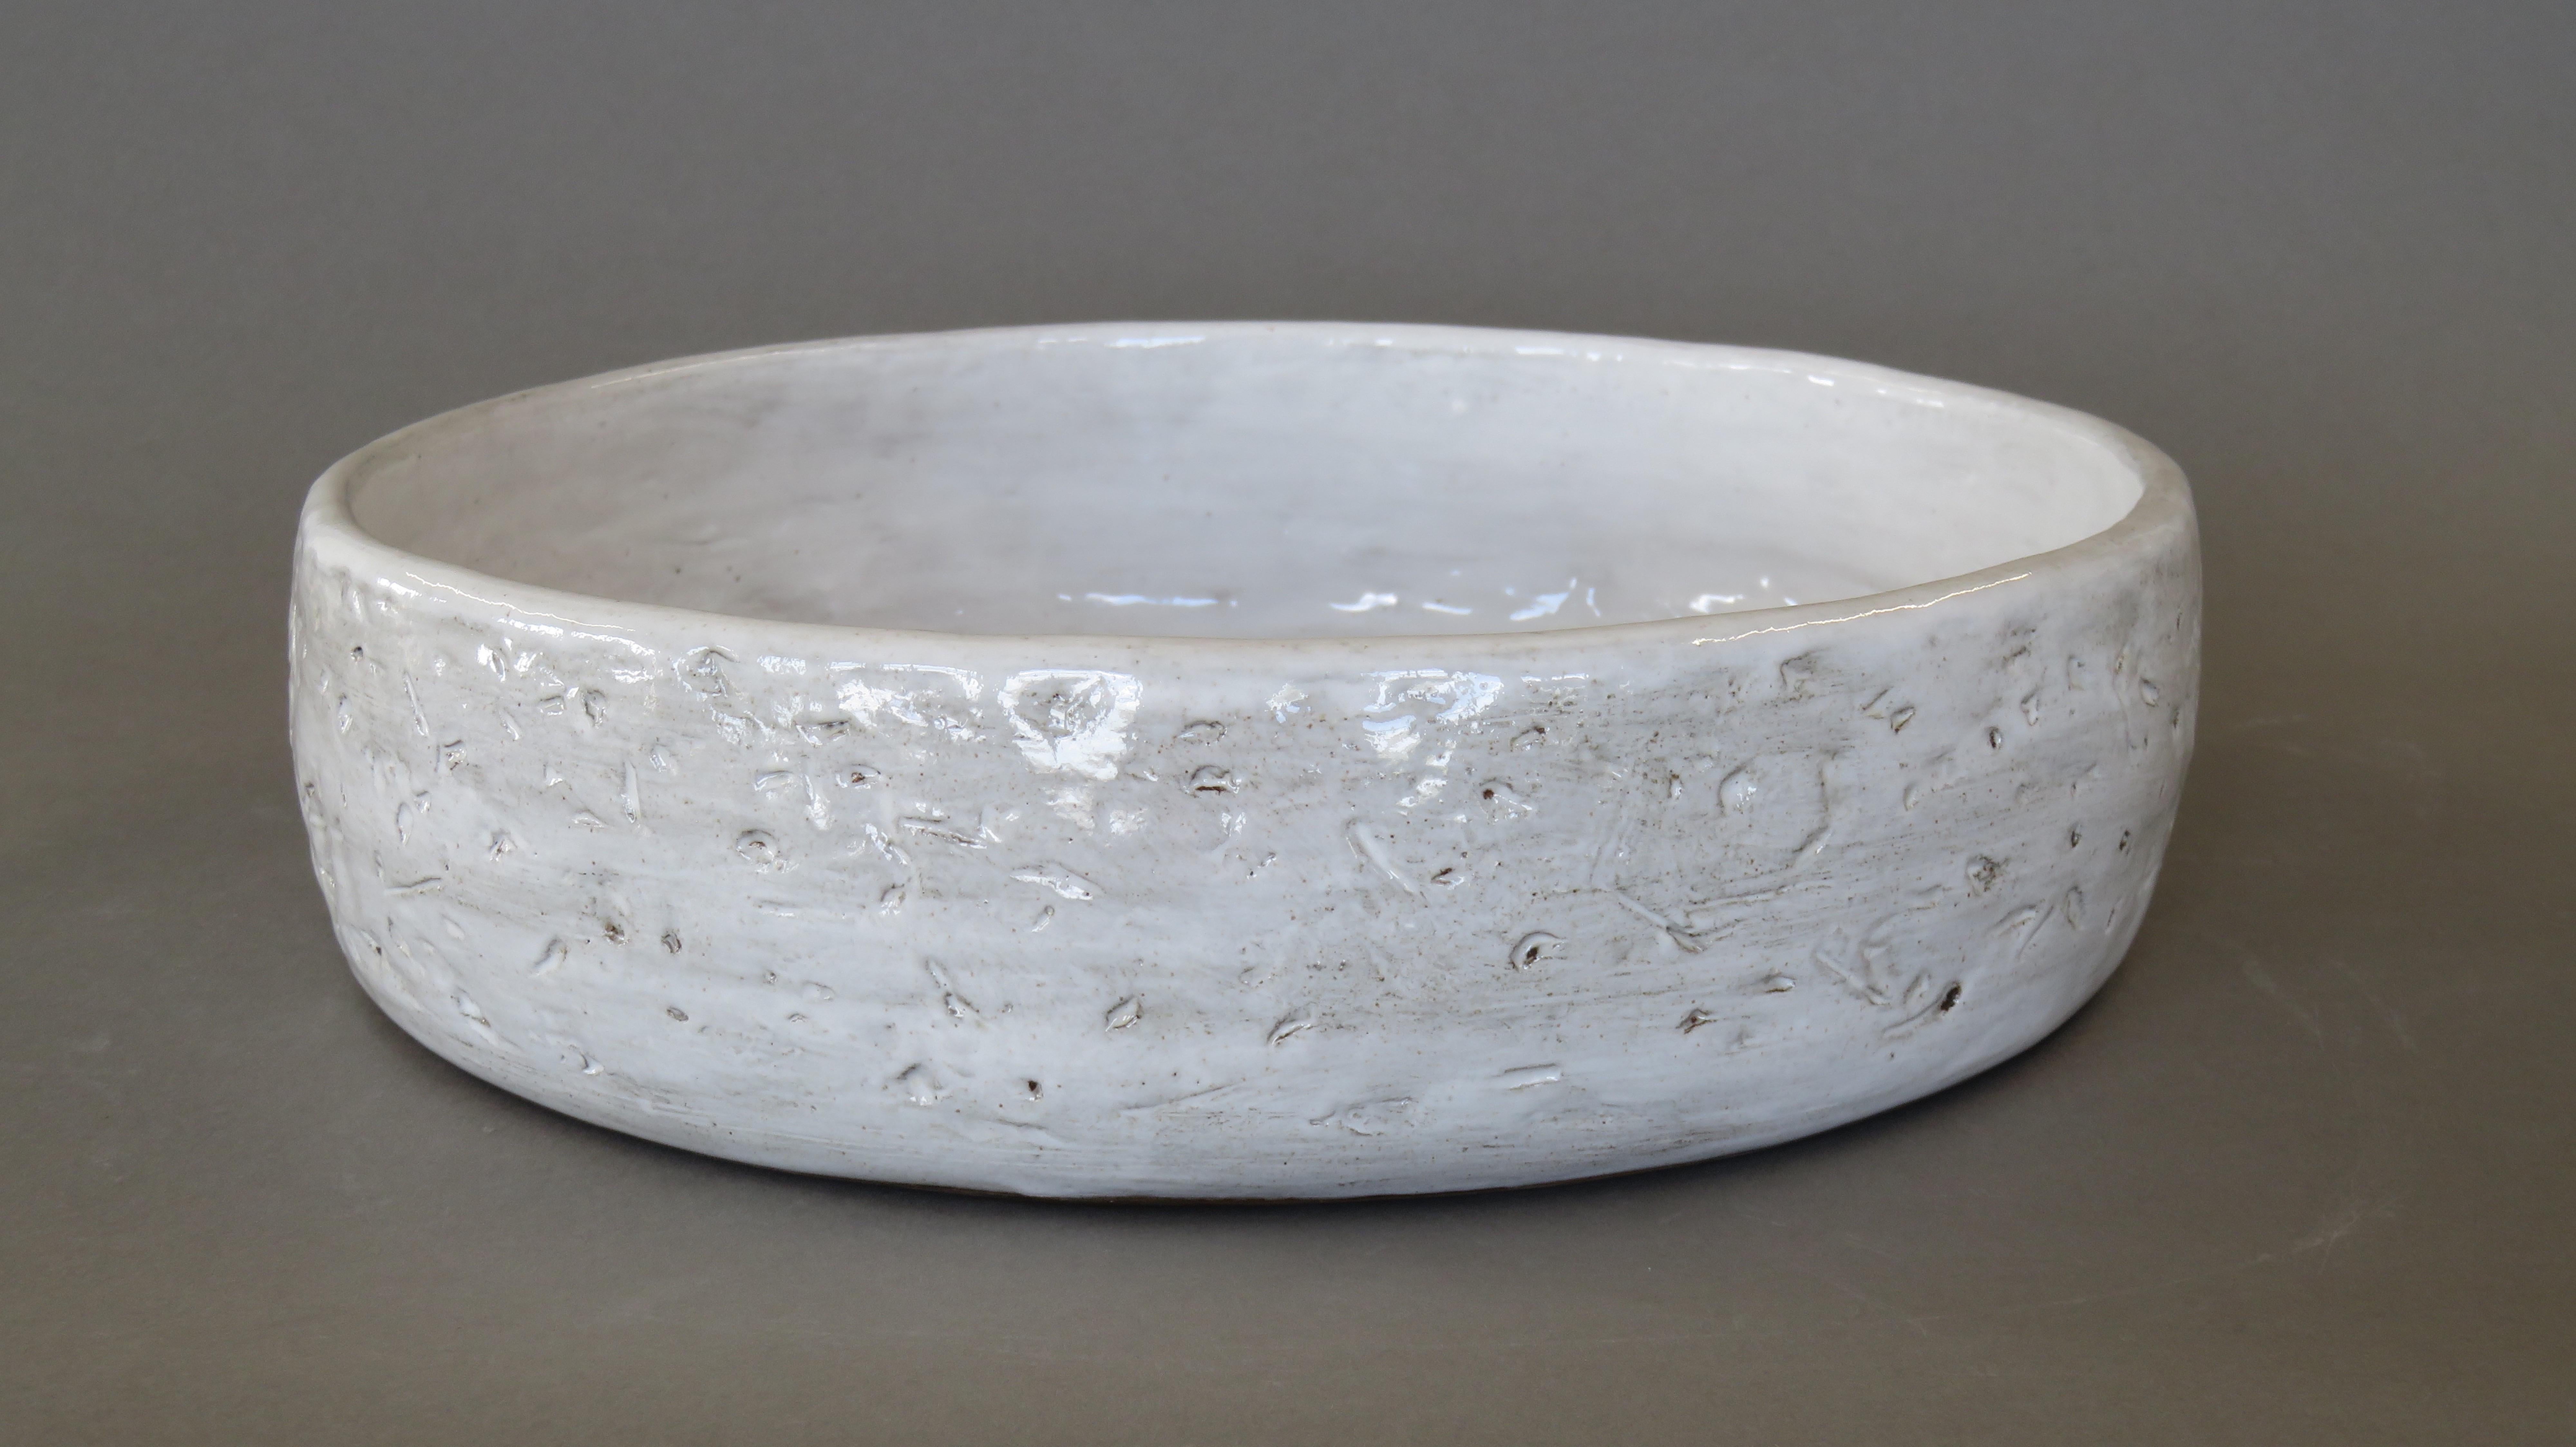 Organic Modern Large Ceramic Serving Bowl, Hand-Marked Exterior With White Glaze, Hand Built